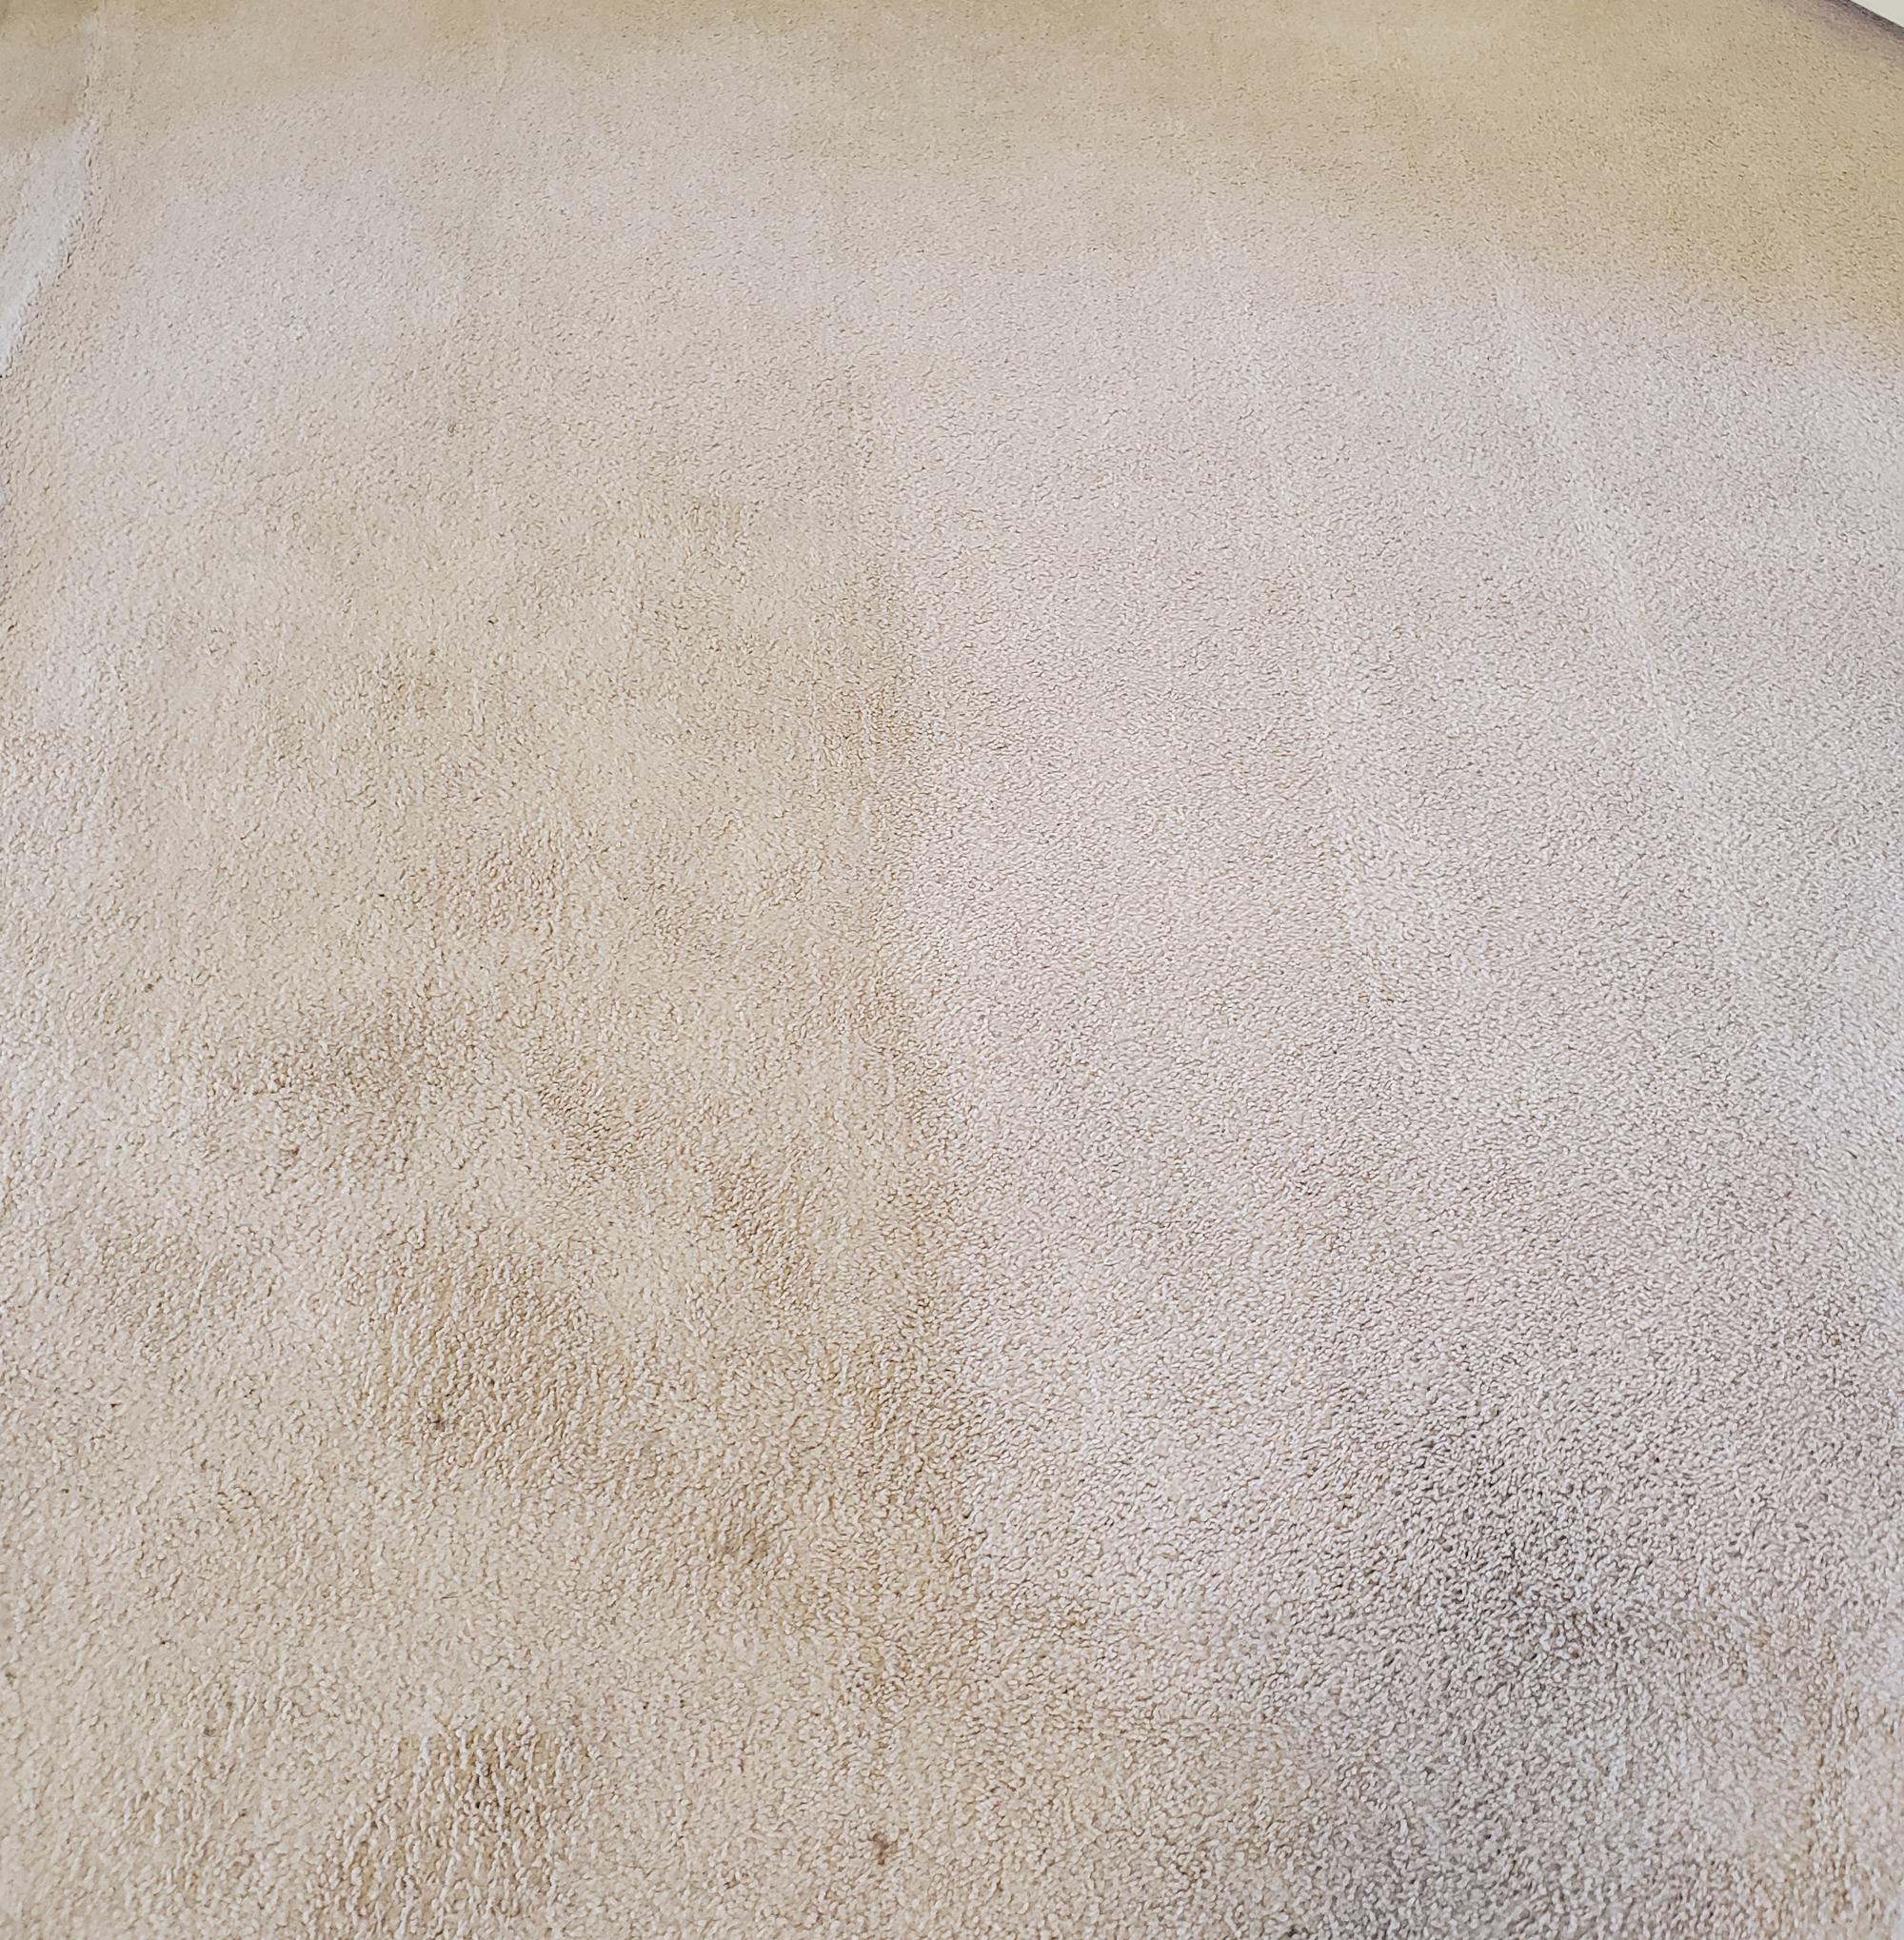 Before and after carpet cleaning in Severna Park